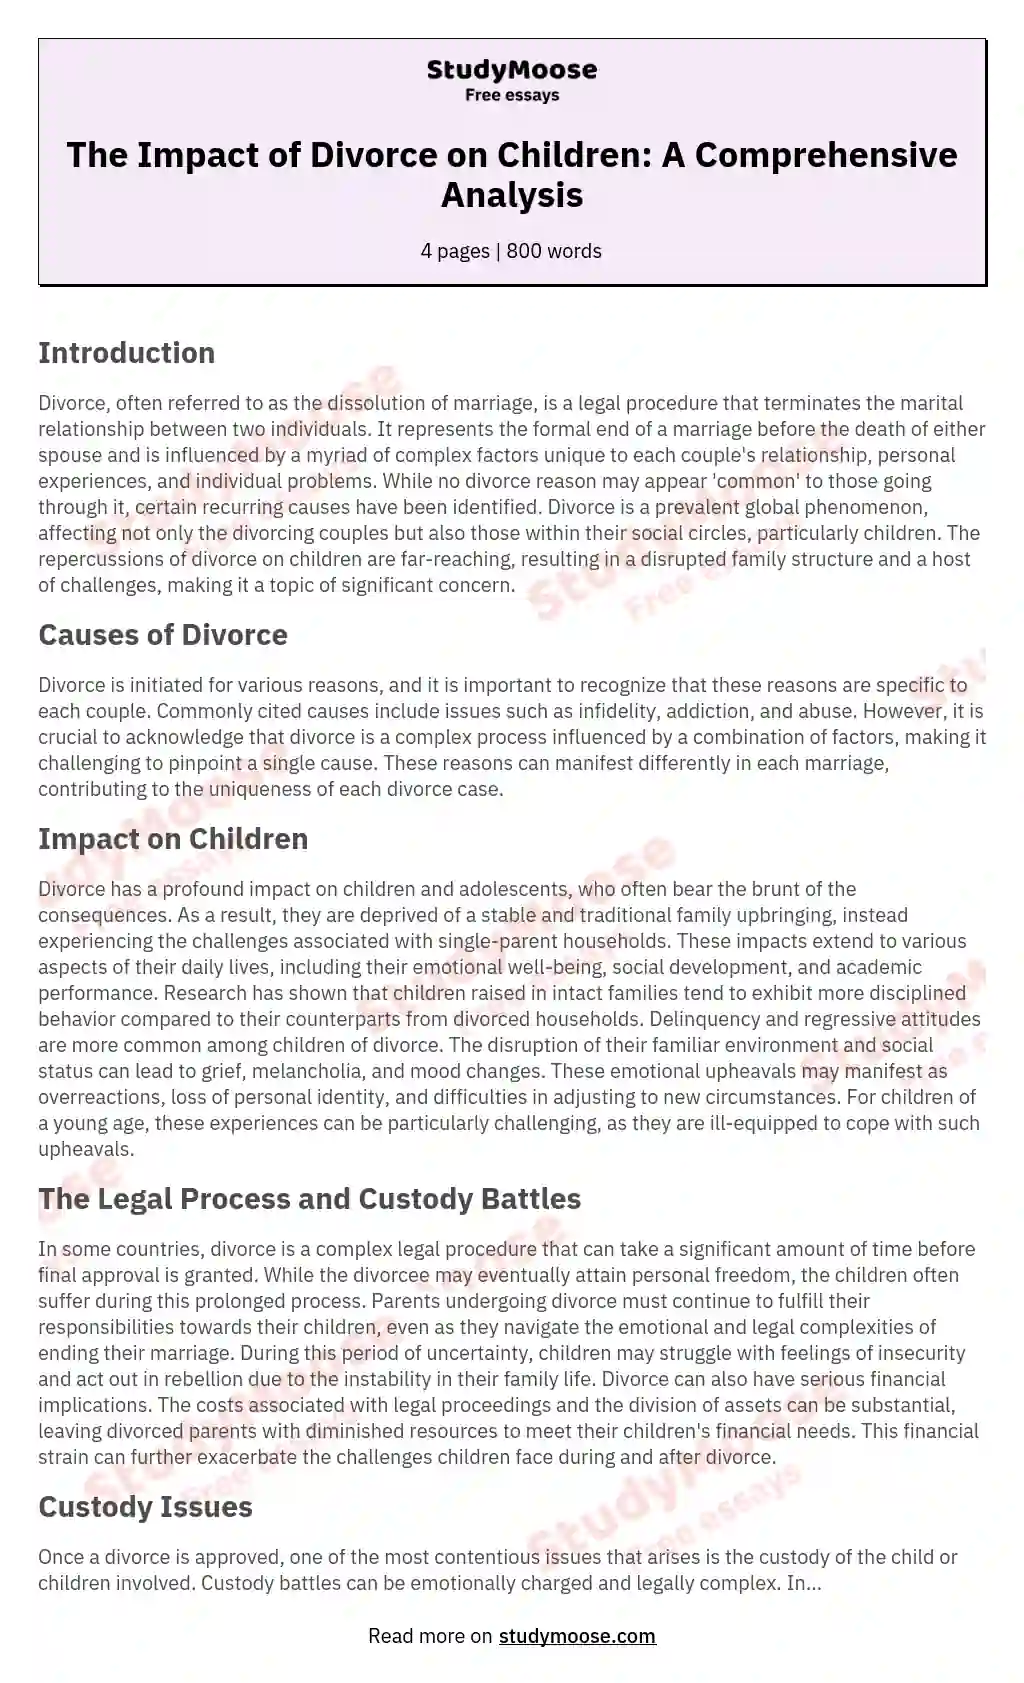 The Impact of Divorce on Children: A Comprehensive Analysis essay